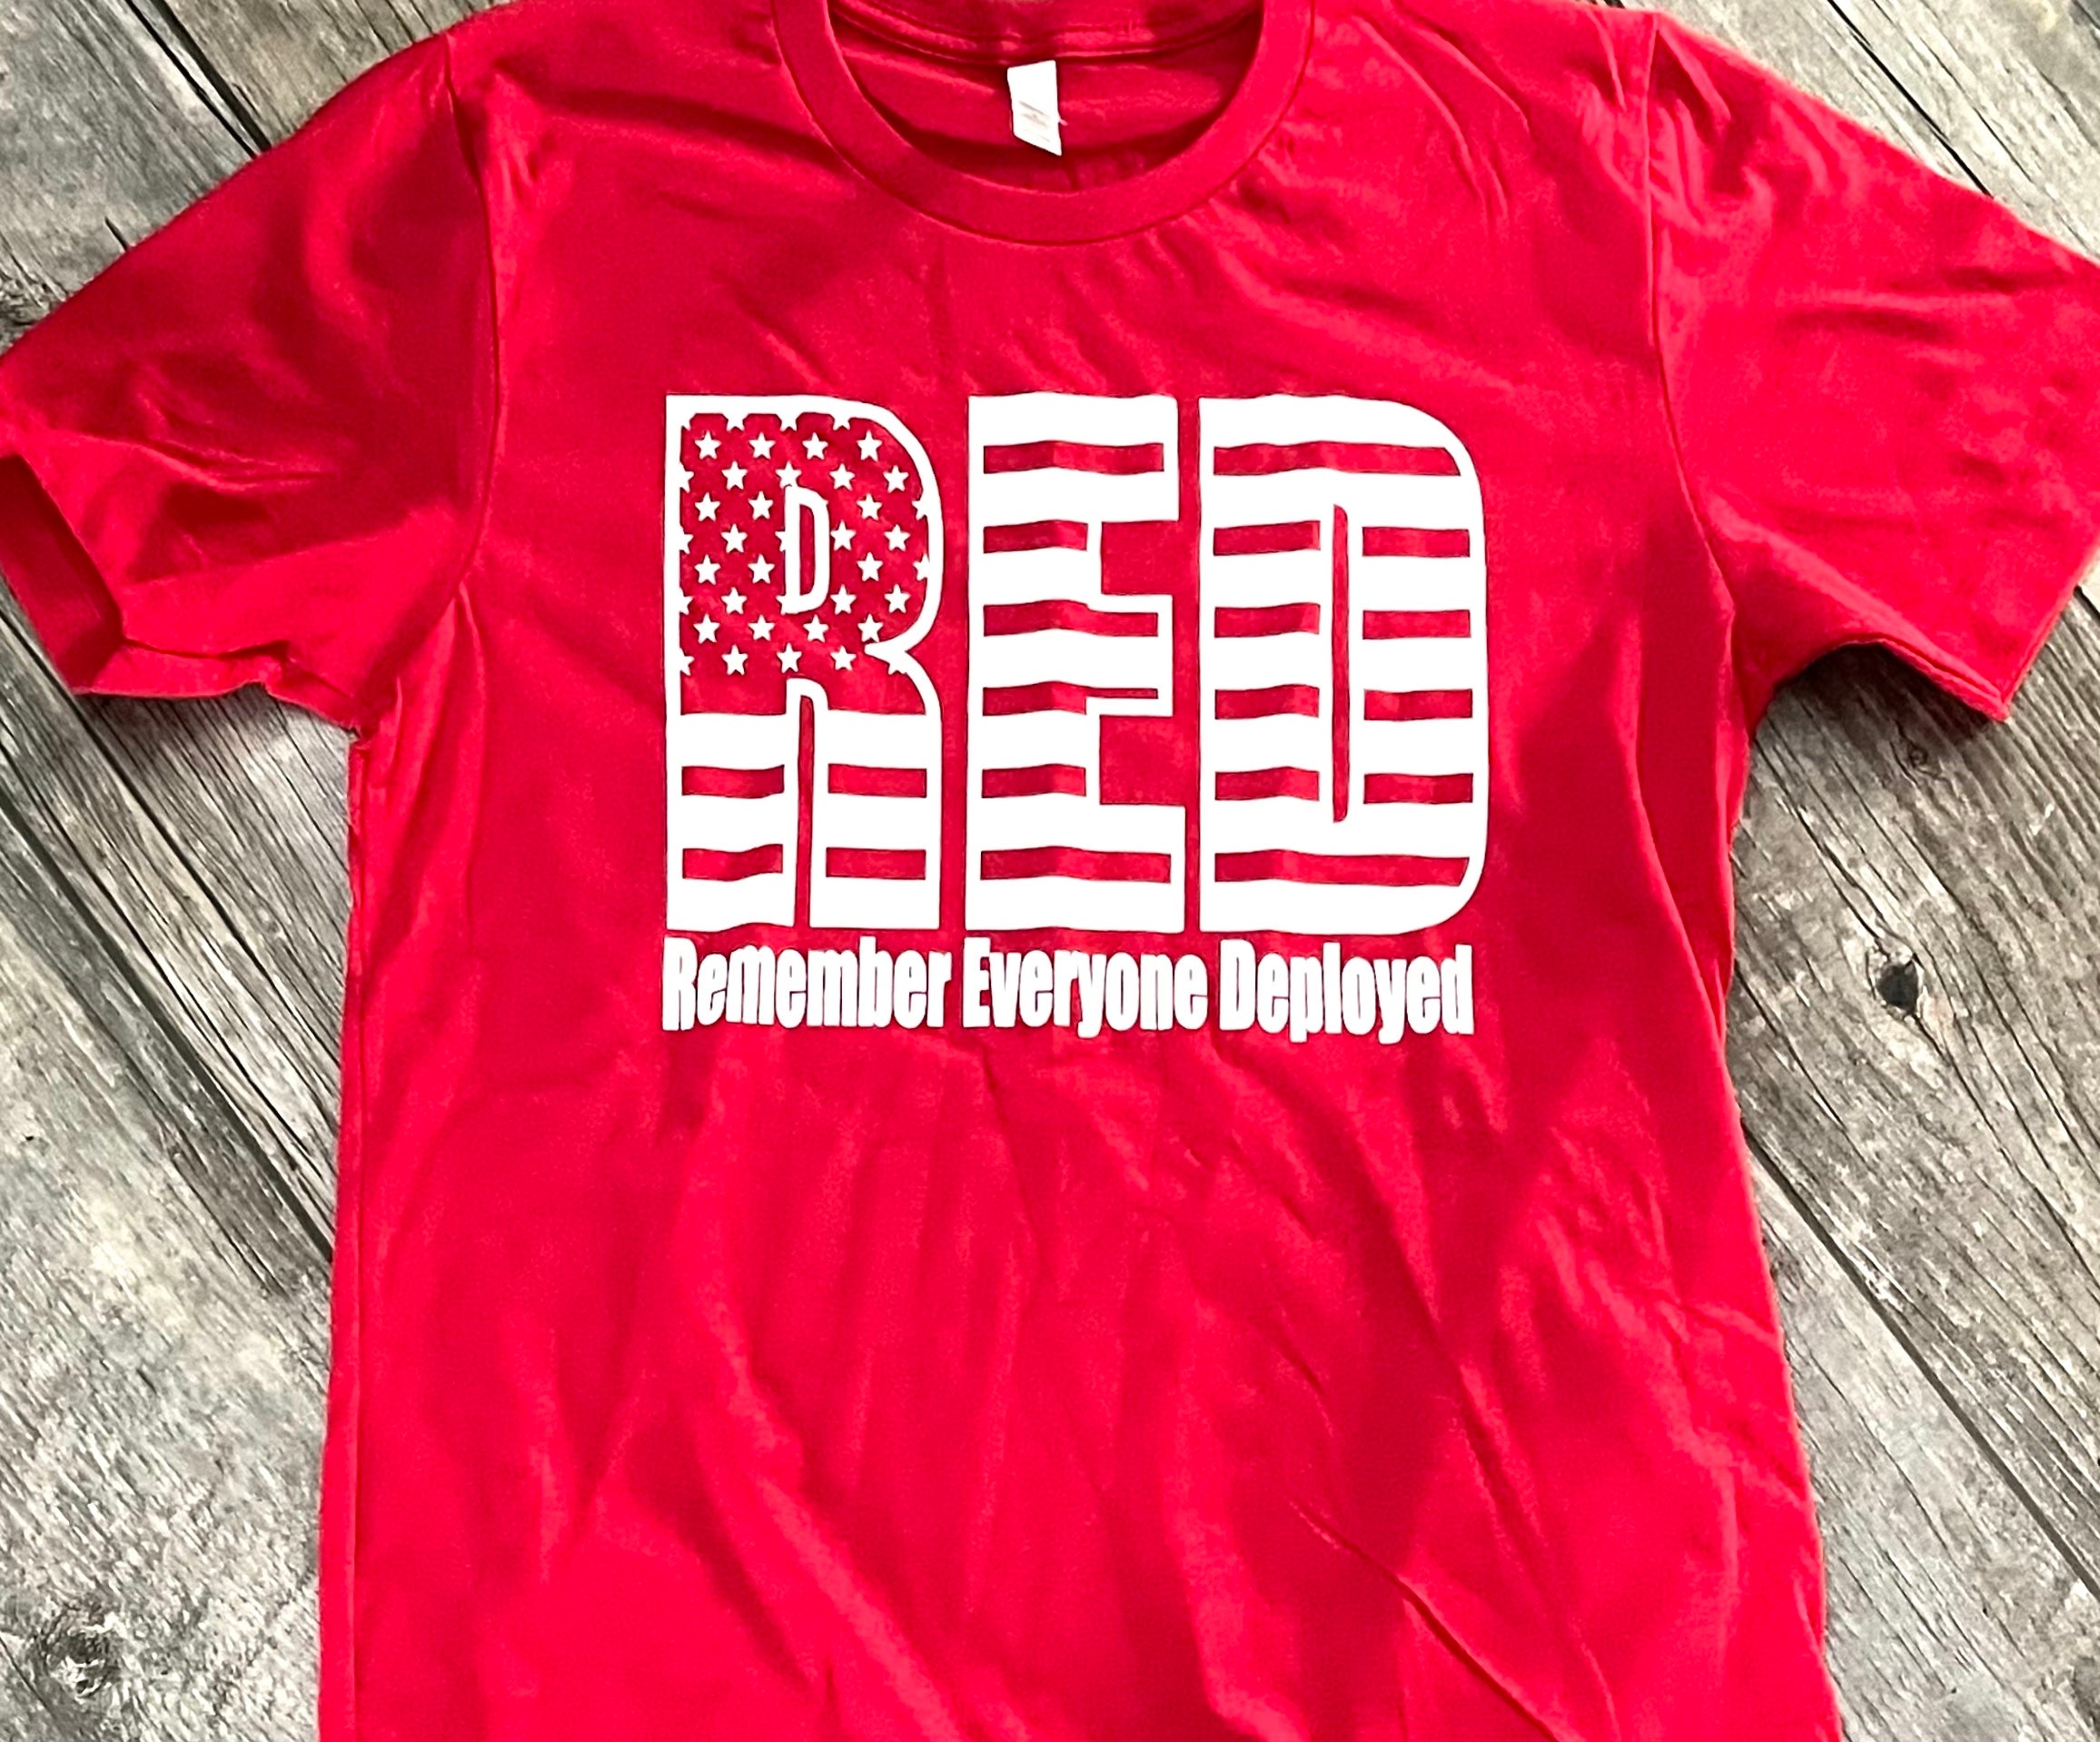 RED Friday unisex tee